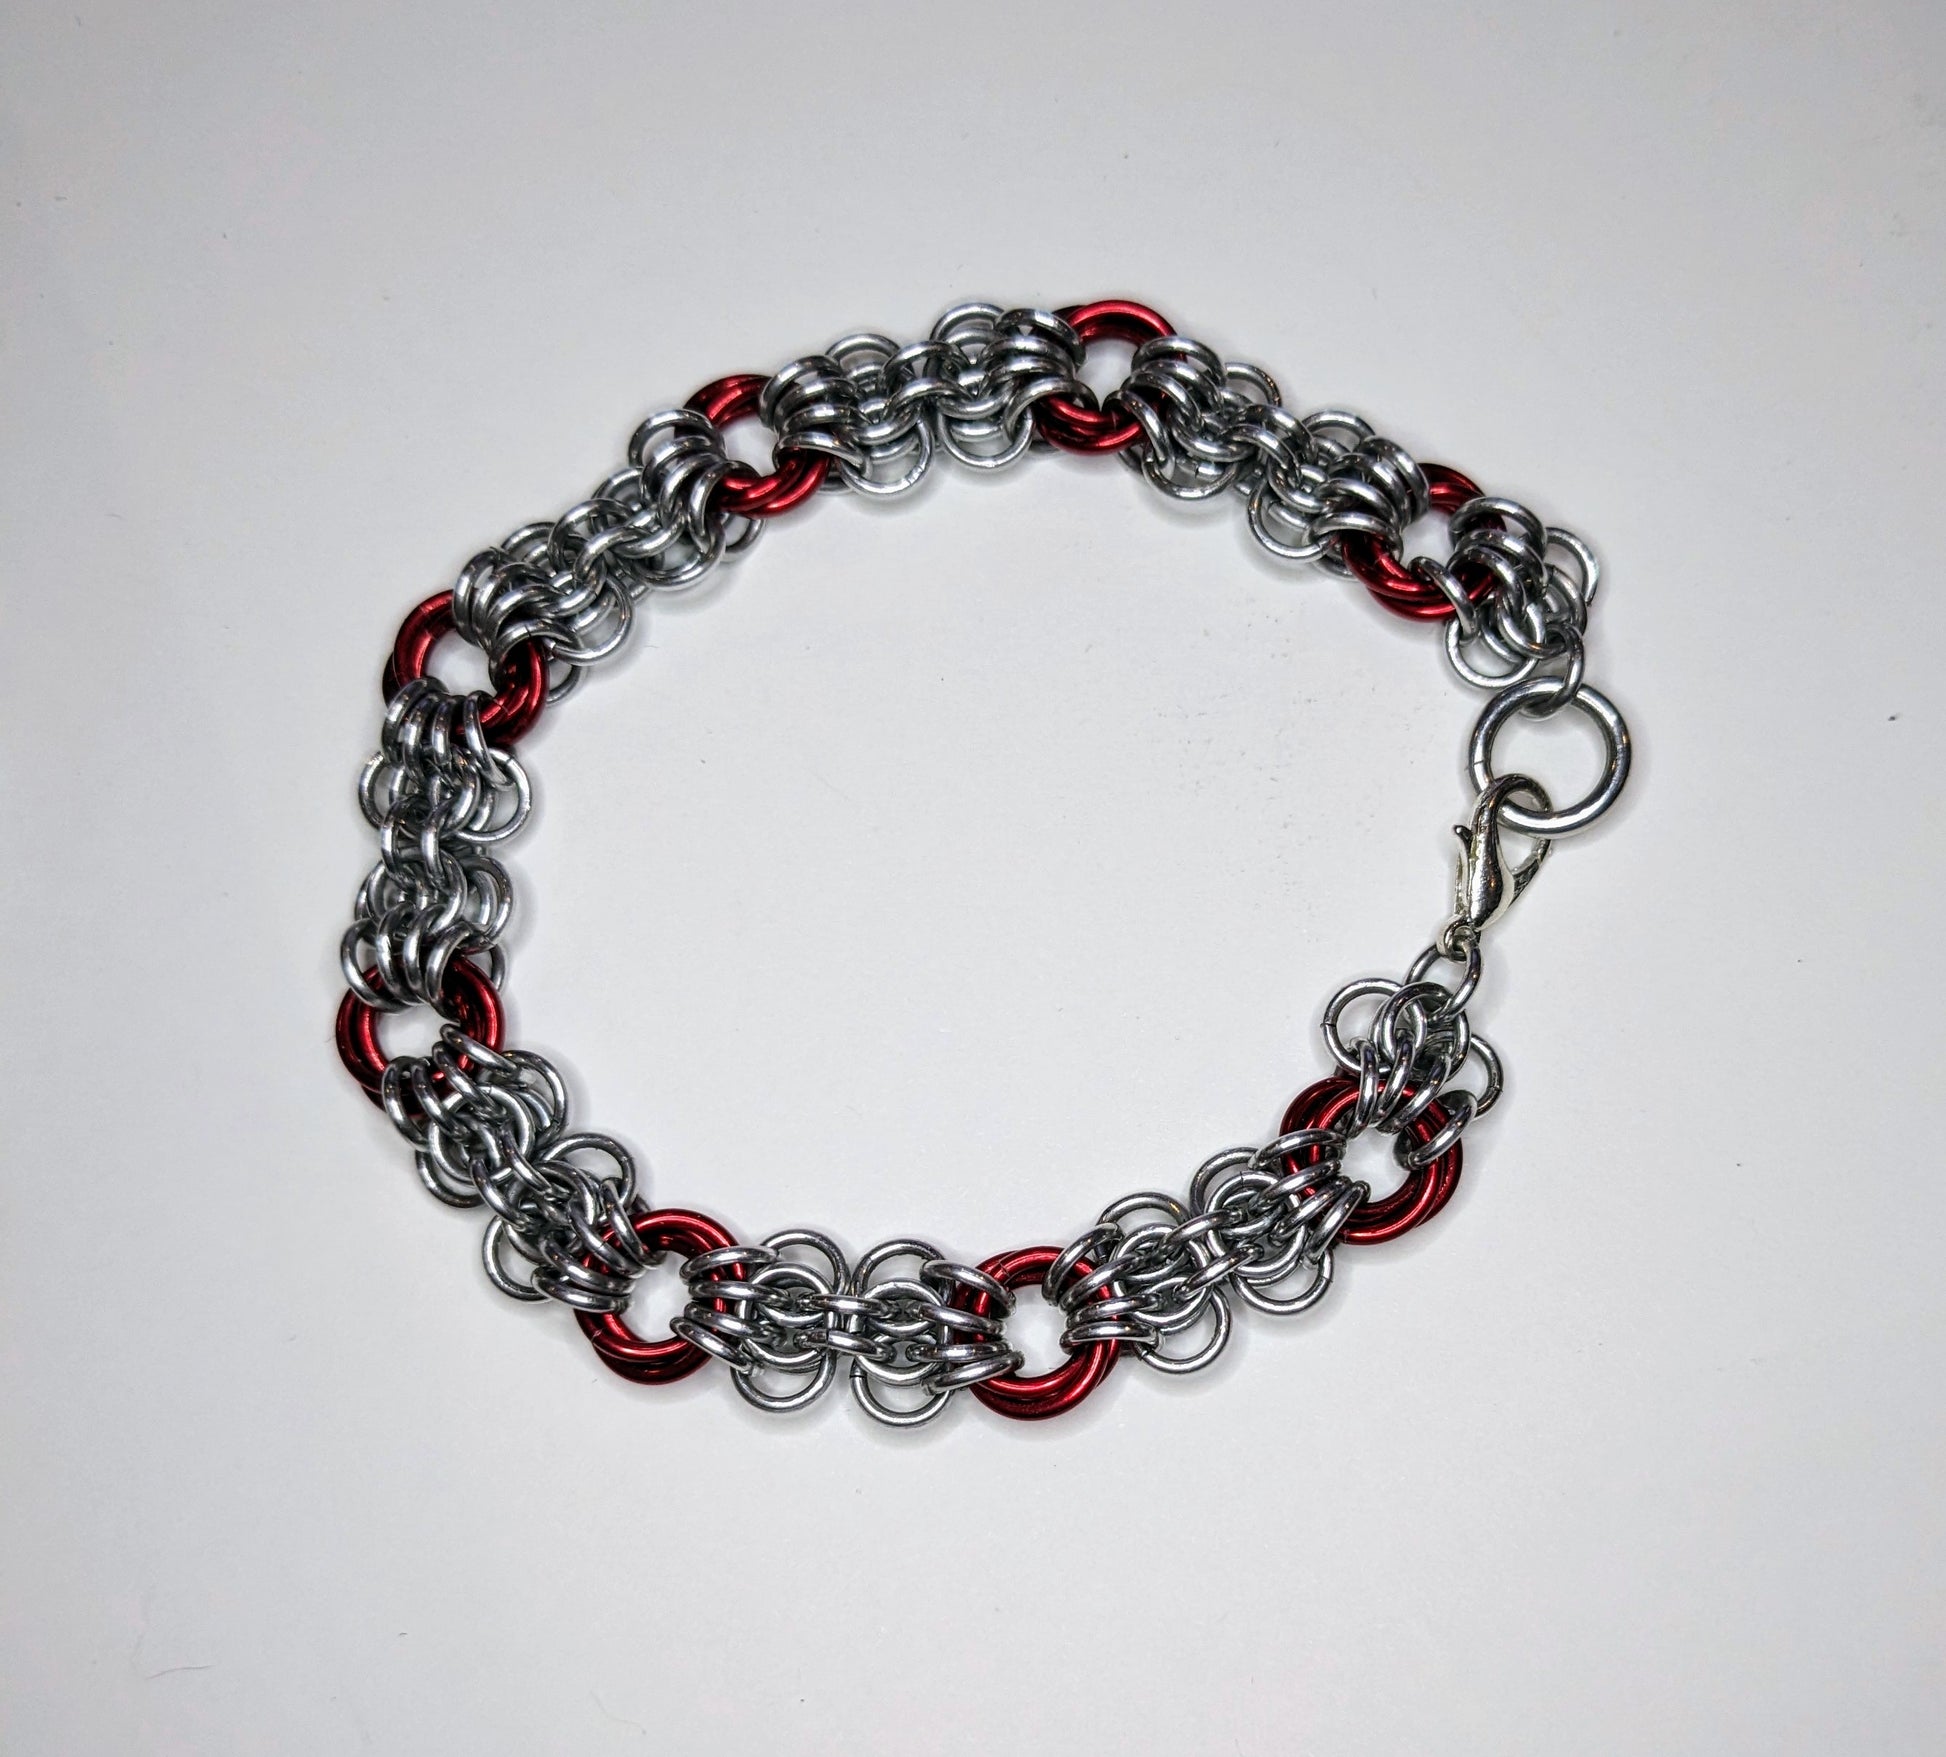 Silver and red butterfly weave chainmail bracelet on a white background.  Bracelet has a lobster clasp.